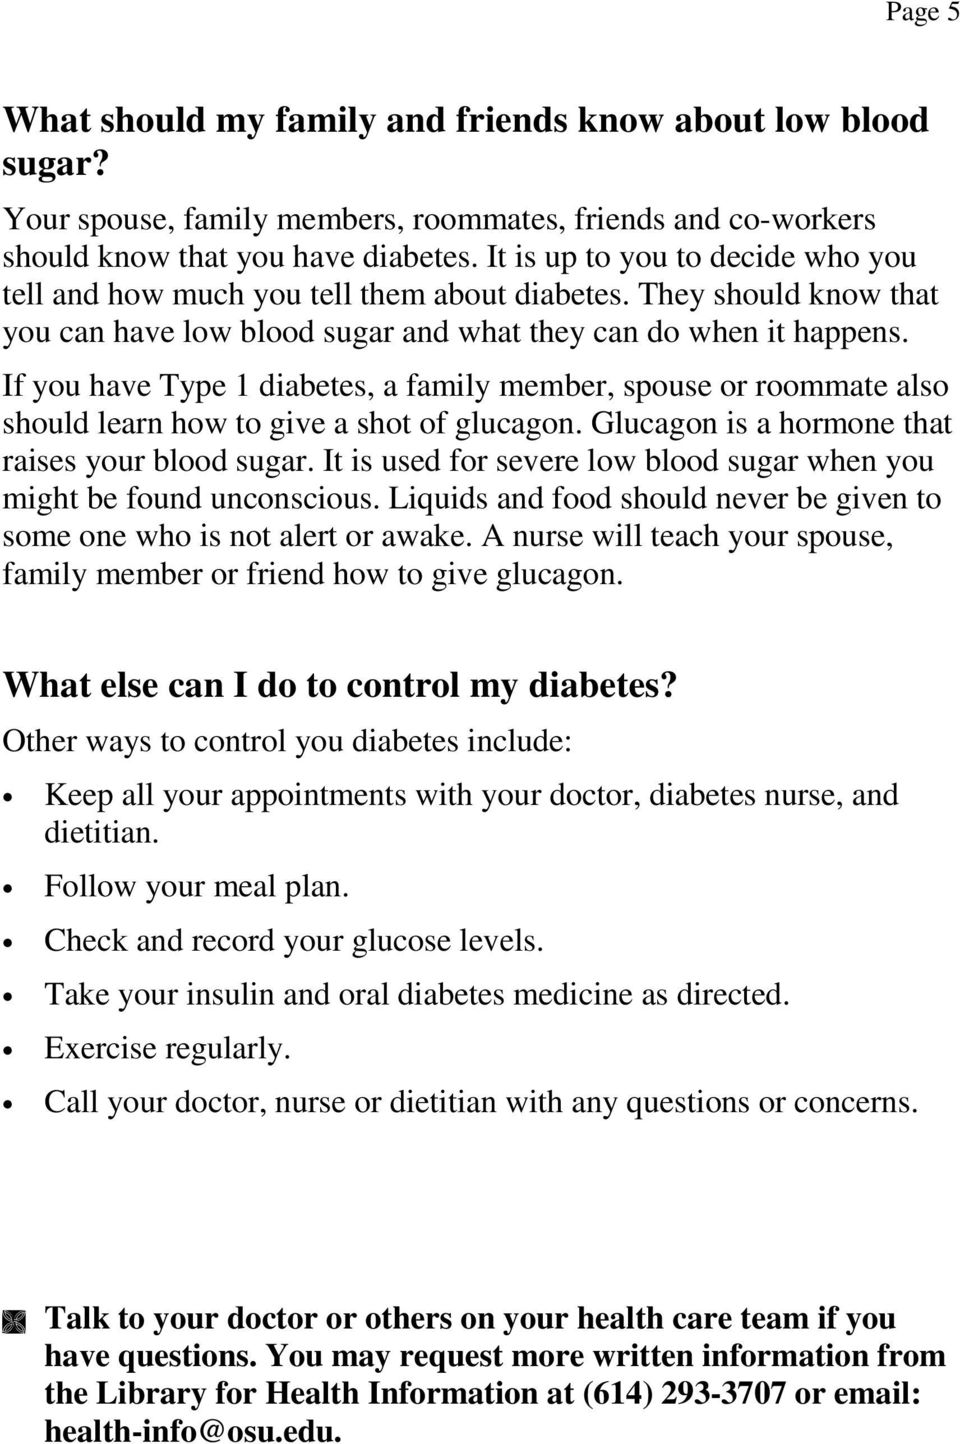 If you have Type 1 diabetes, a family member, spouse or roommate also should learn how to give a shot of glucagon. Glucagon is a hormone that raises your blood sugar.